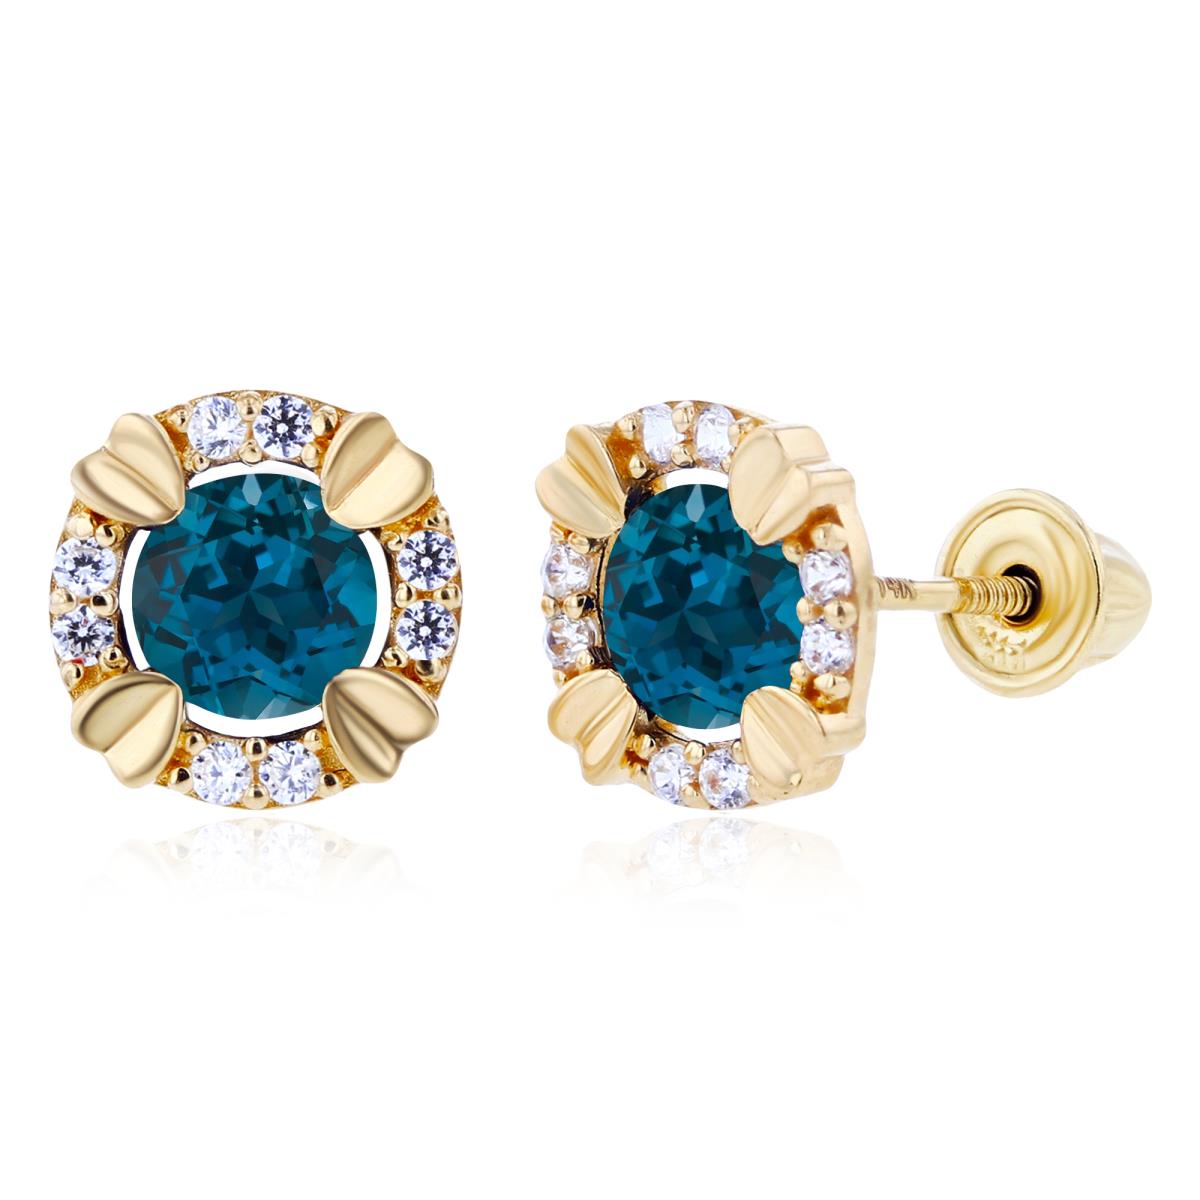 14K Yellow Gold 4mm Round London Blue Topaz & 1mm Created White Sapphire Halo Screwback Earrings